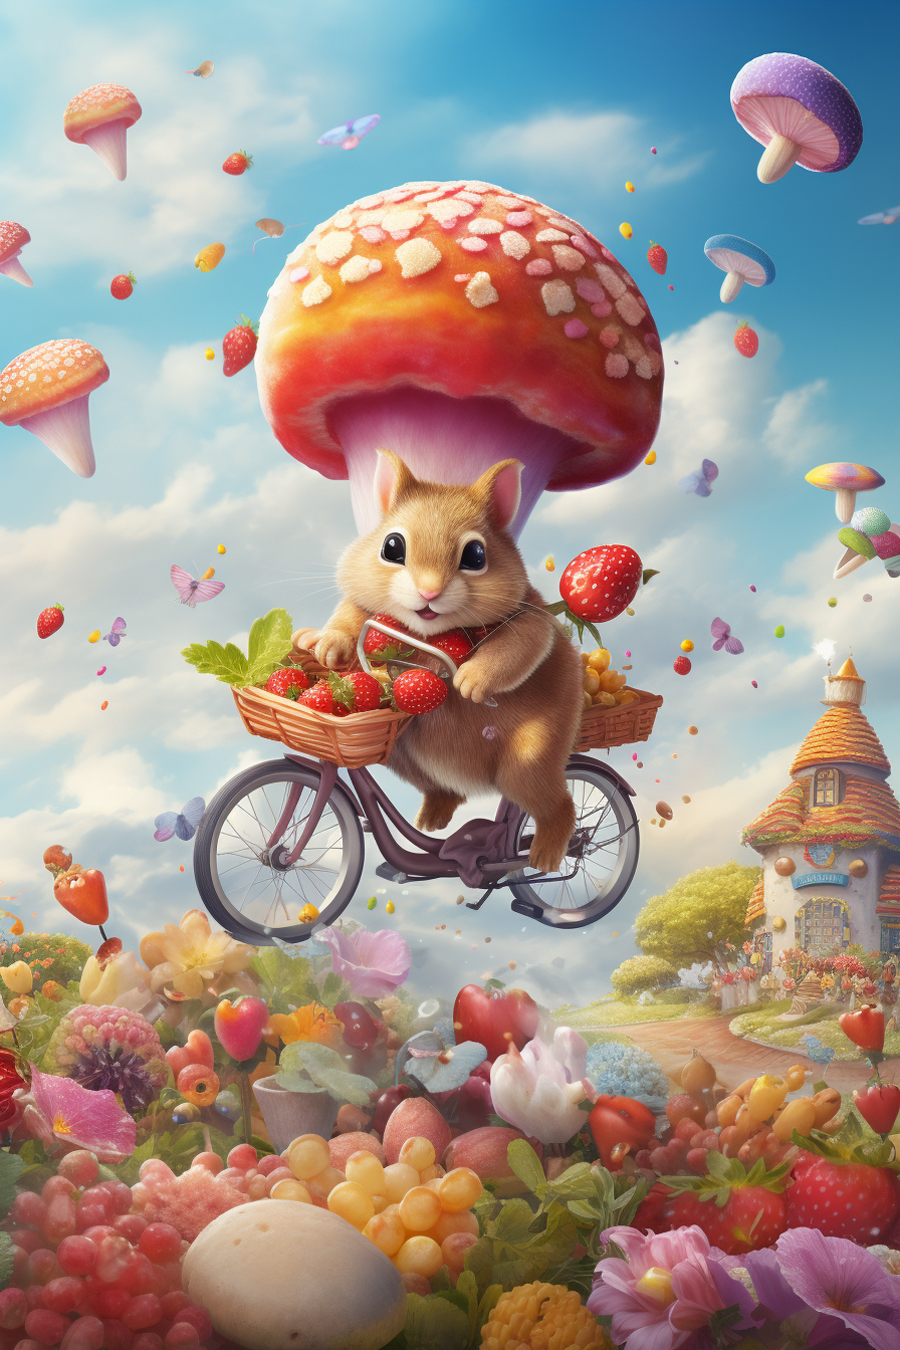 A squirrel riding a bicycle with a basket of strawberries and a mushroom.